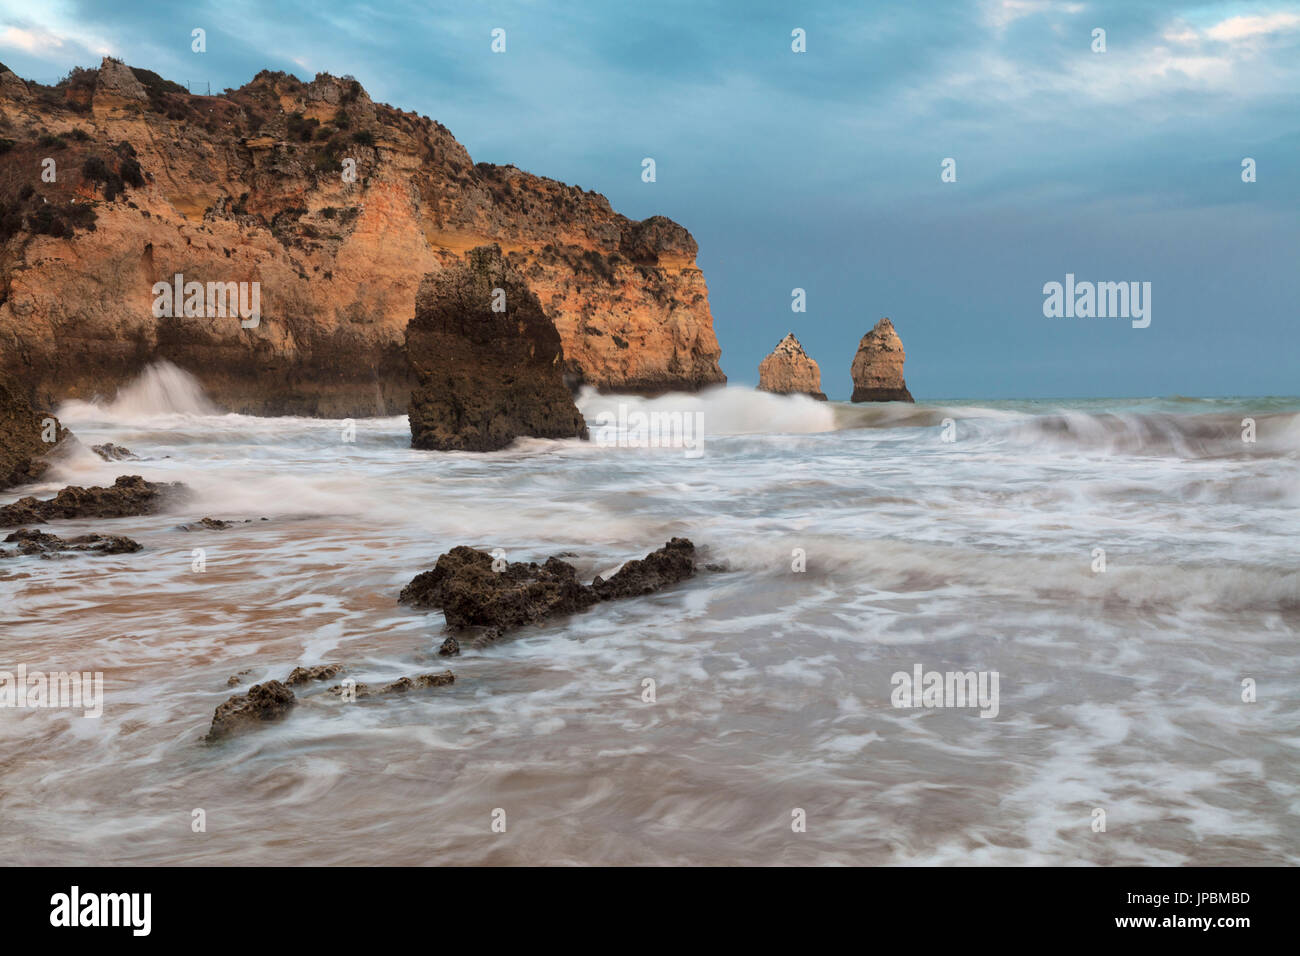 Clouds frame the rough sea and cliffs at sunset Praia Dos Tres Irmaos Portimao Algarve Portugal Europe Stock Photo